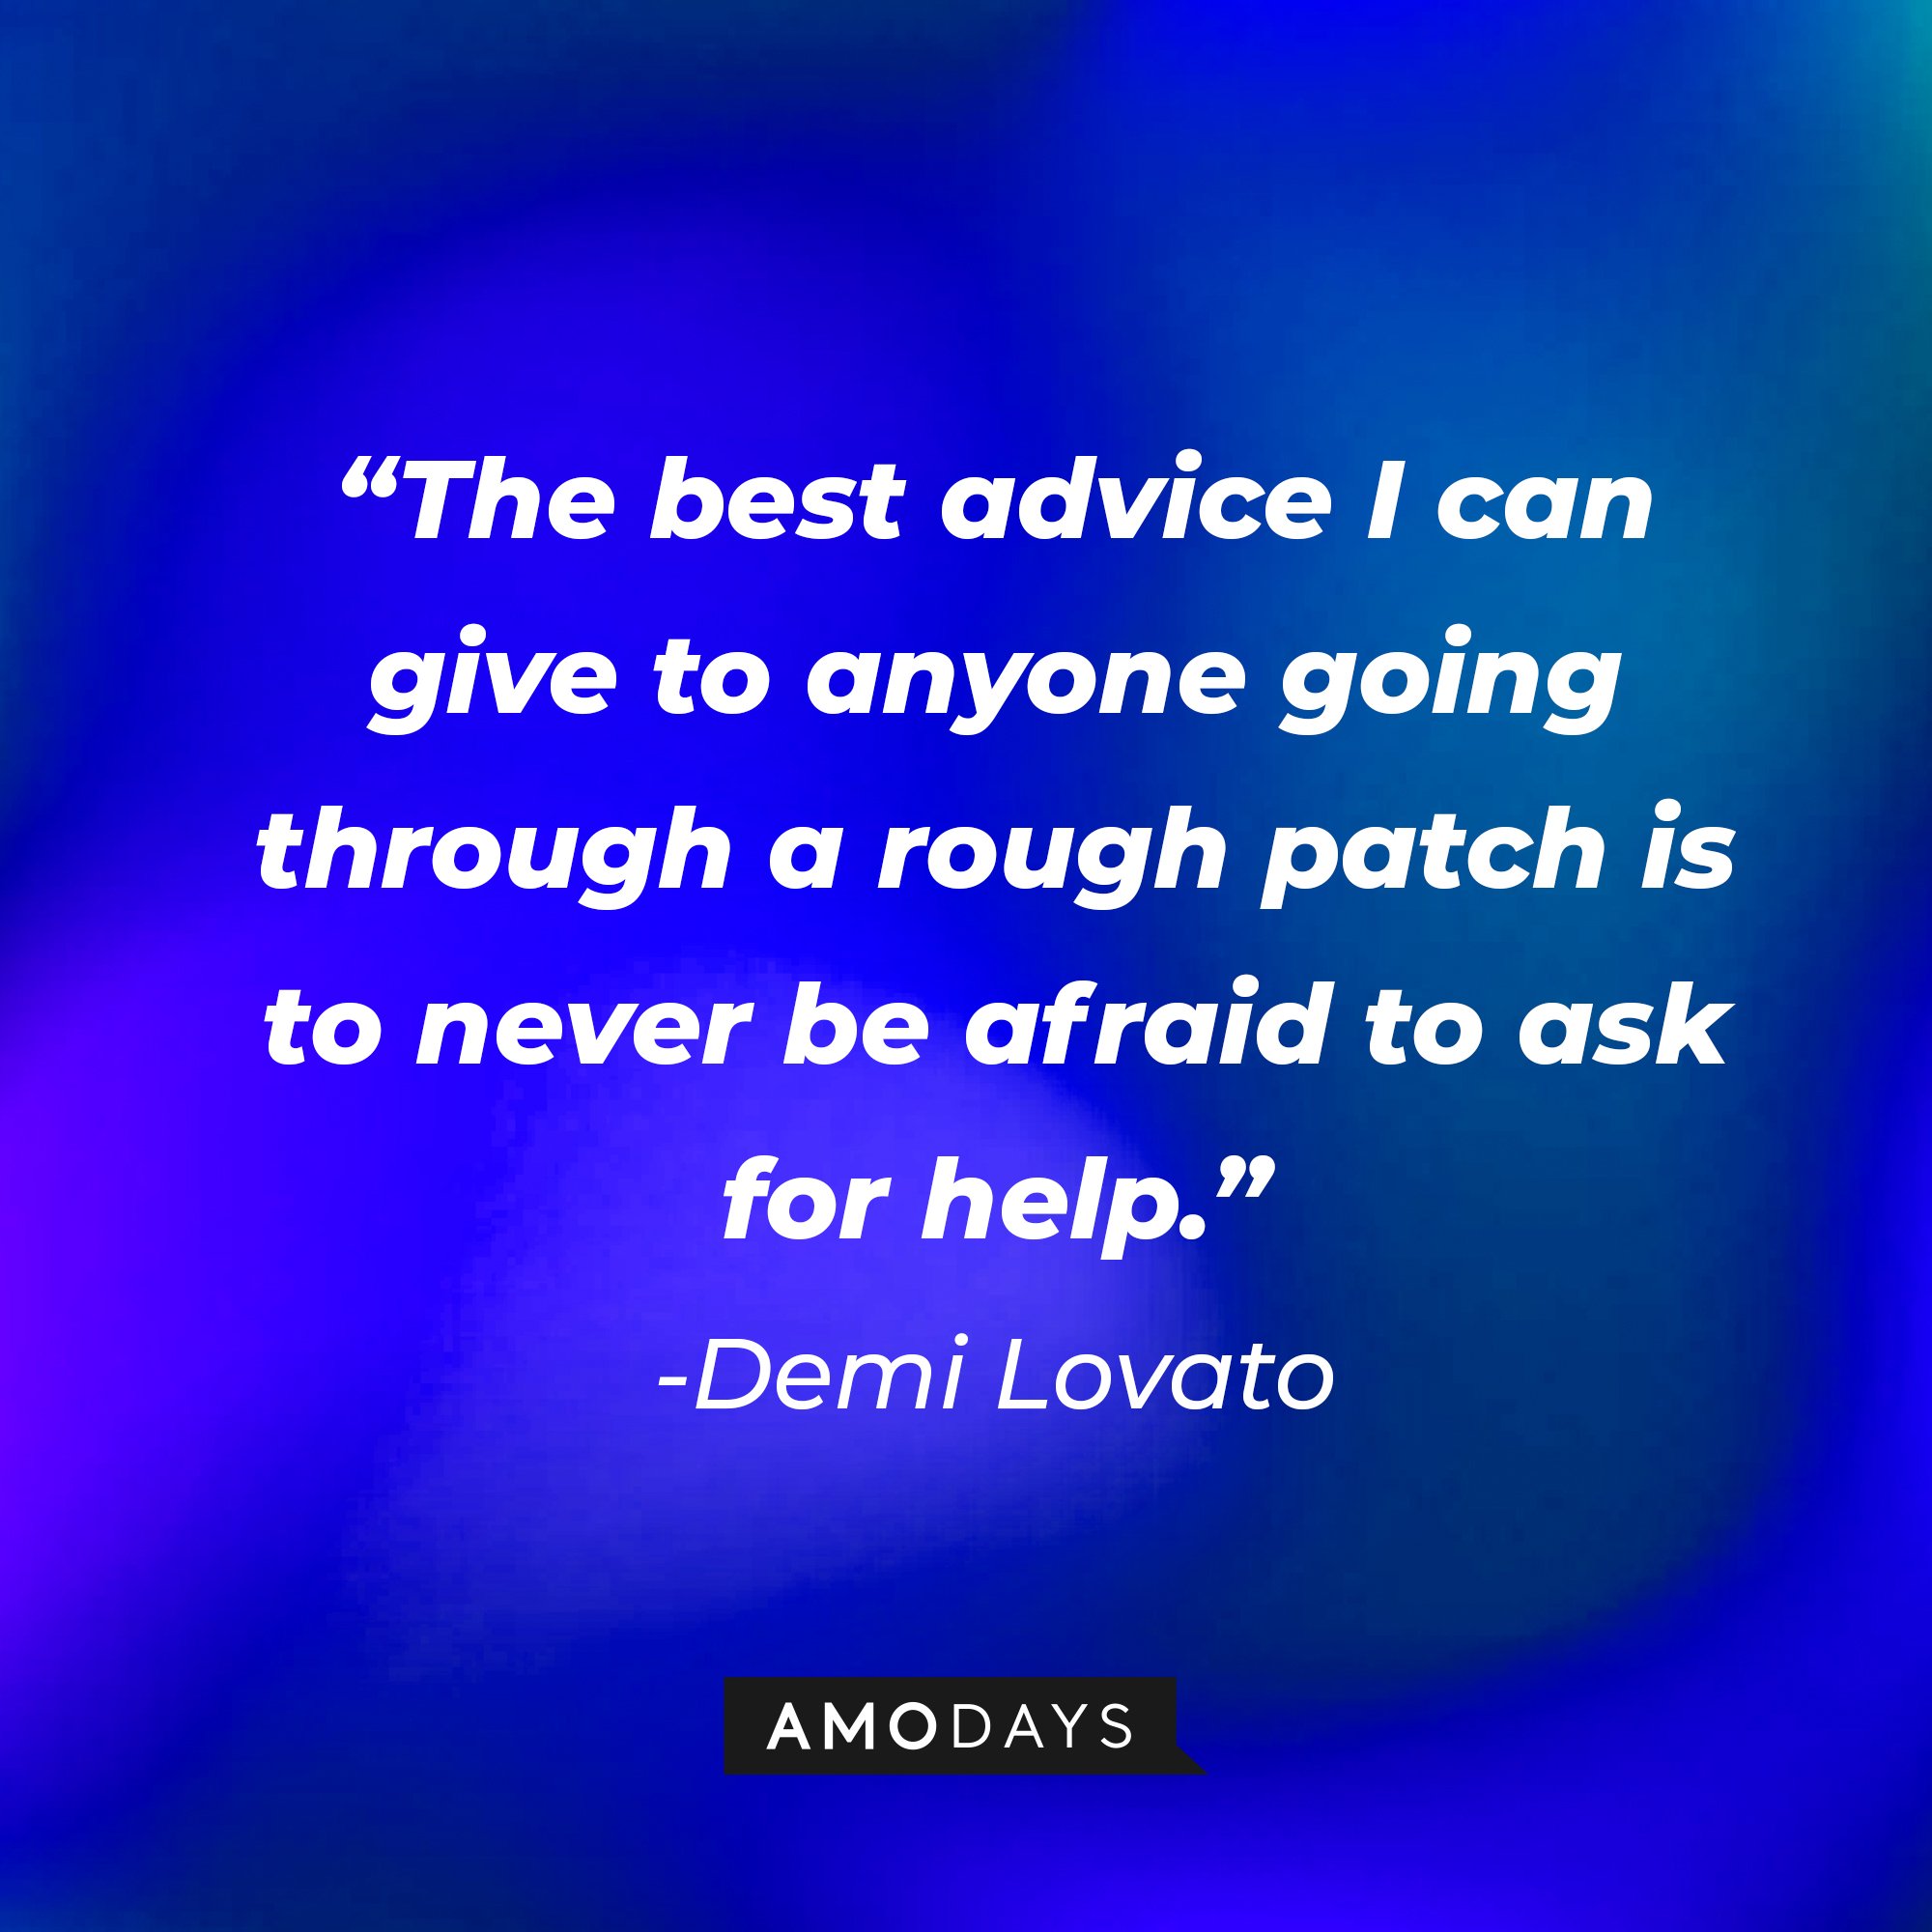 Demi Lovato’s quote: “The best advice I can give to anyone going through a rough patch is to never be afraid to ask for help.” | Image: AmoDays